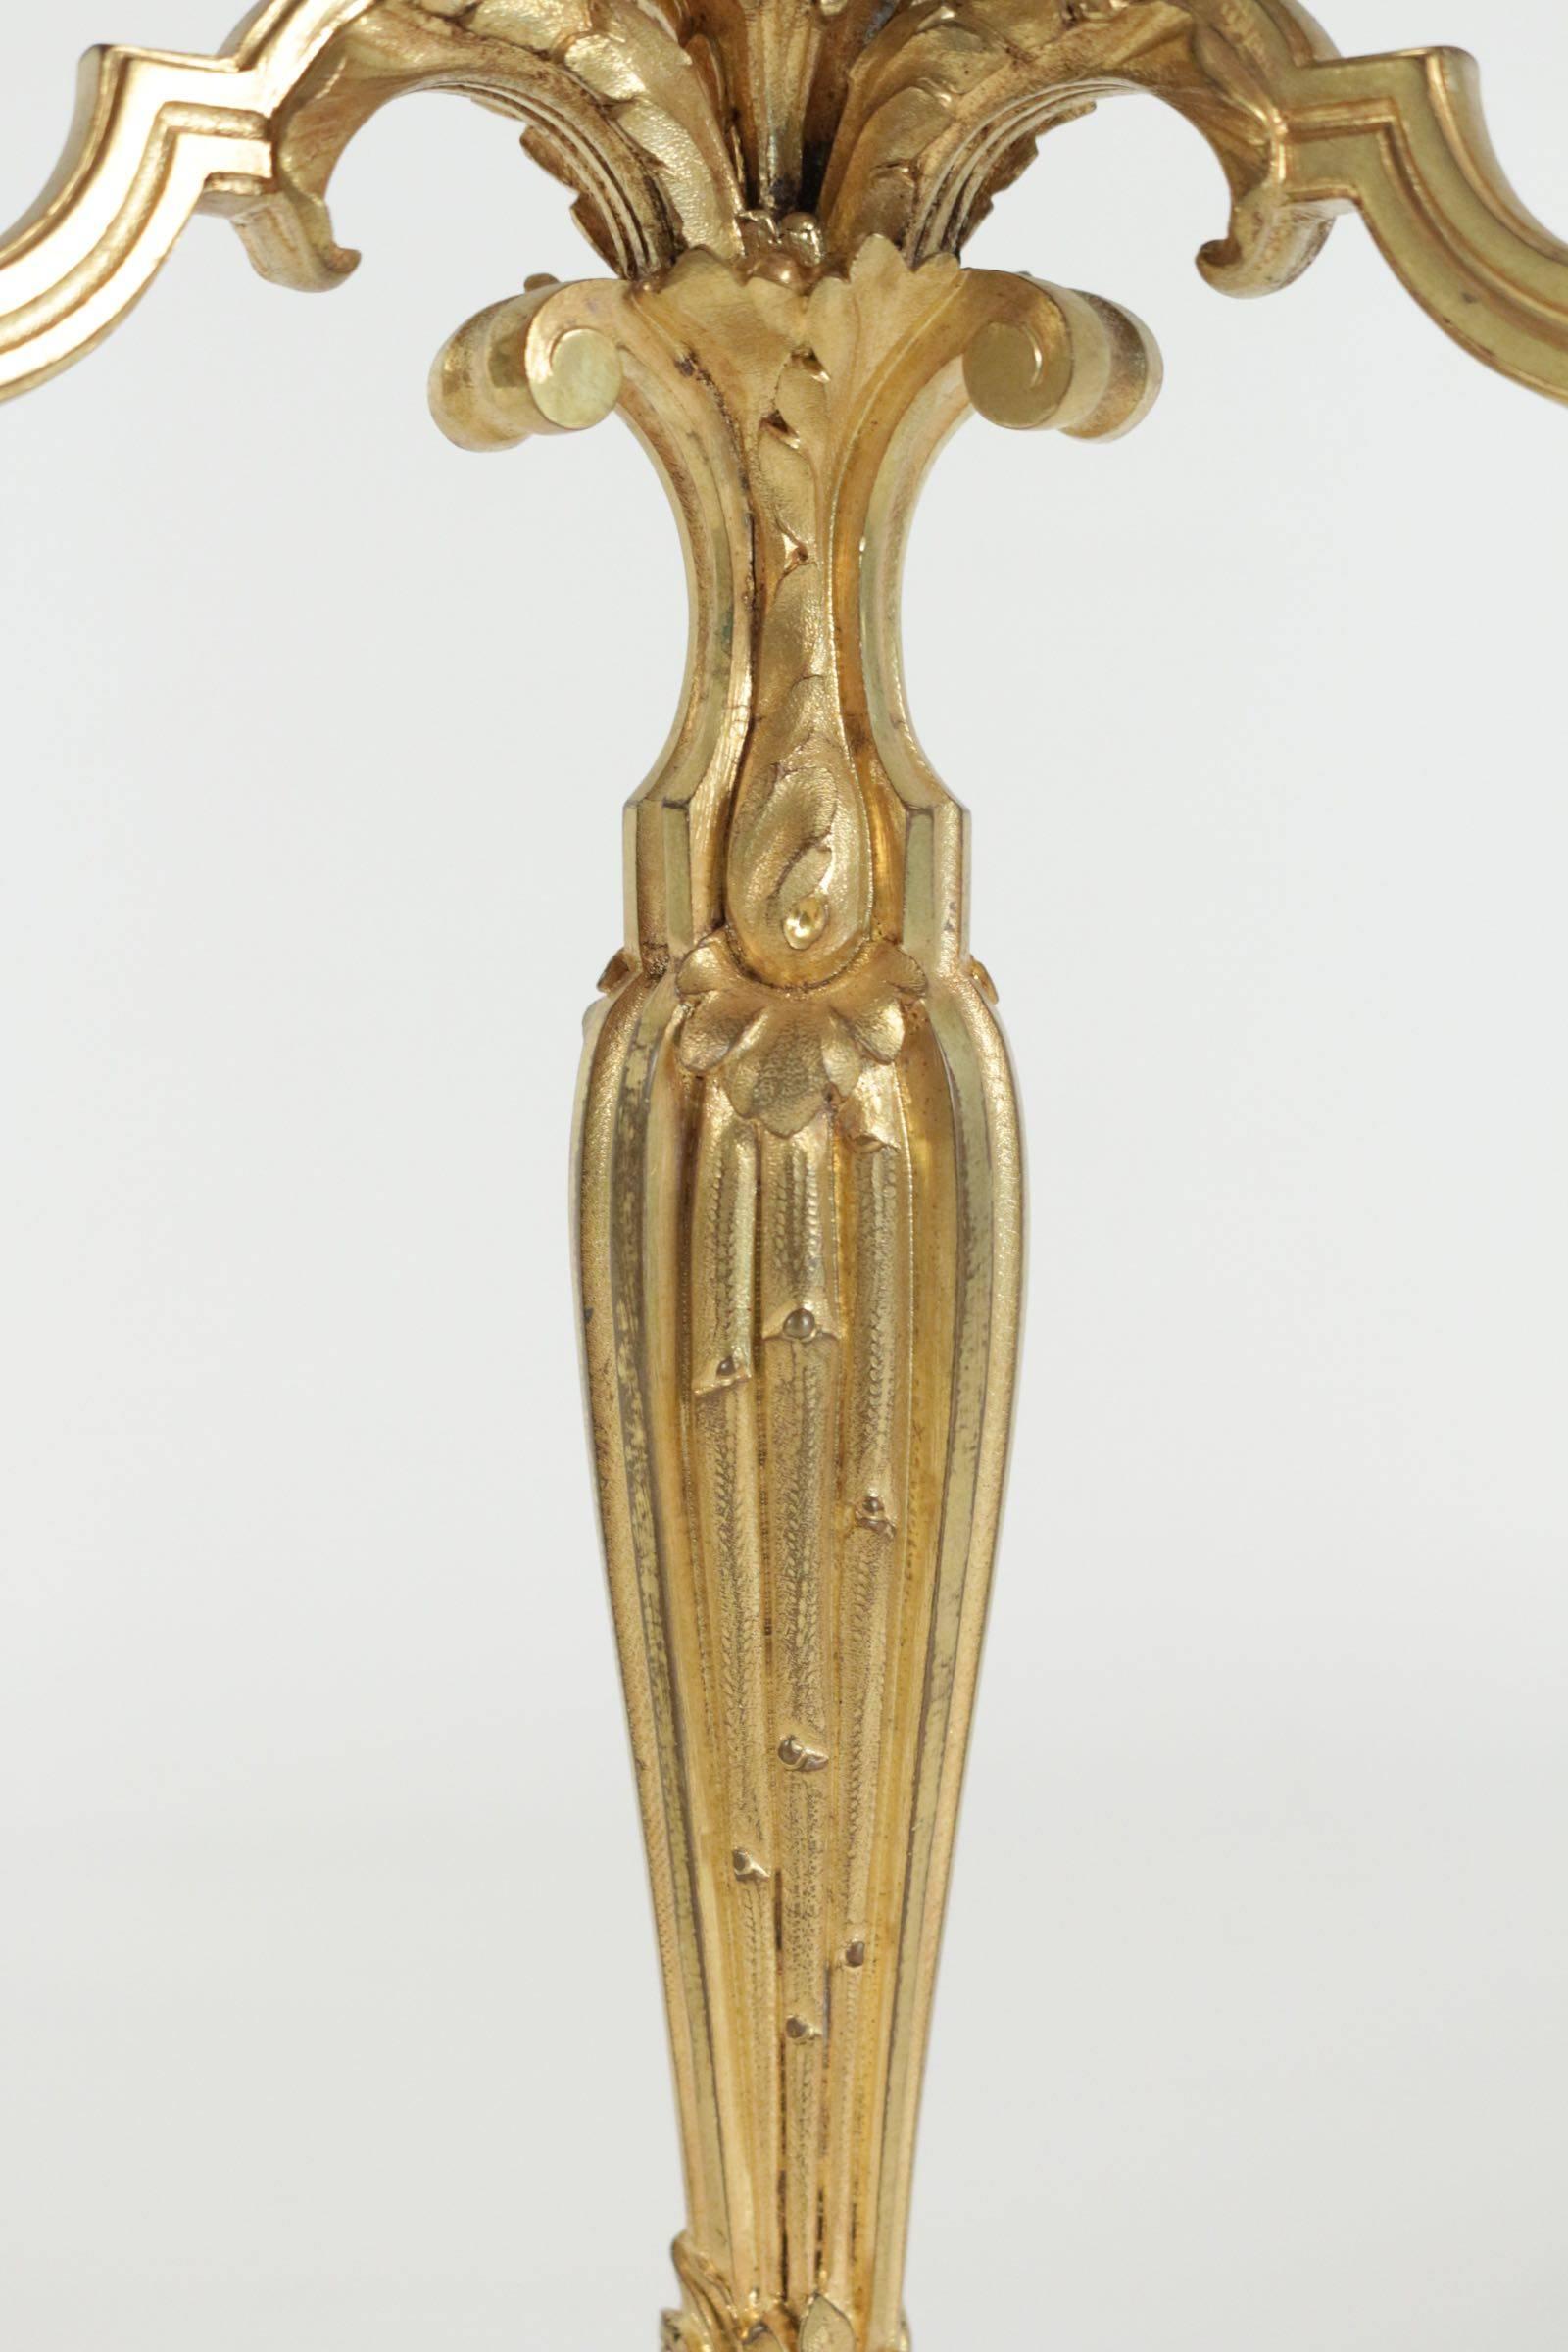 Pair of Candelabra in the Style of Louis XV in Gold Gilt Bronze, 19th Century For Sale 4